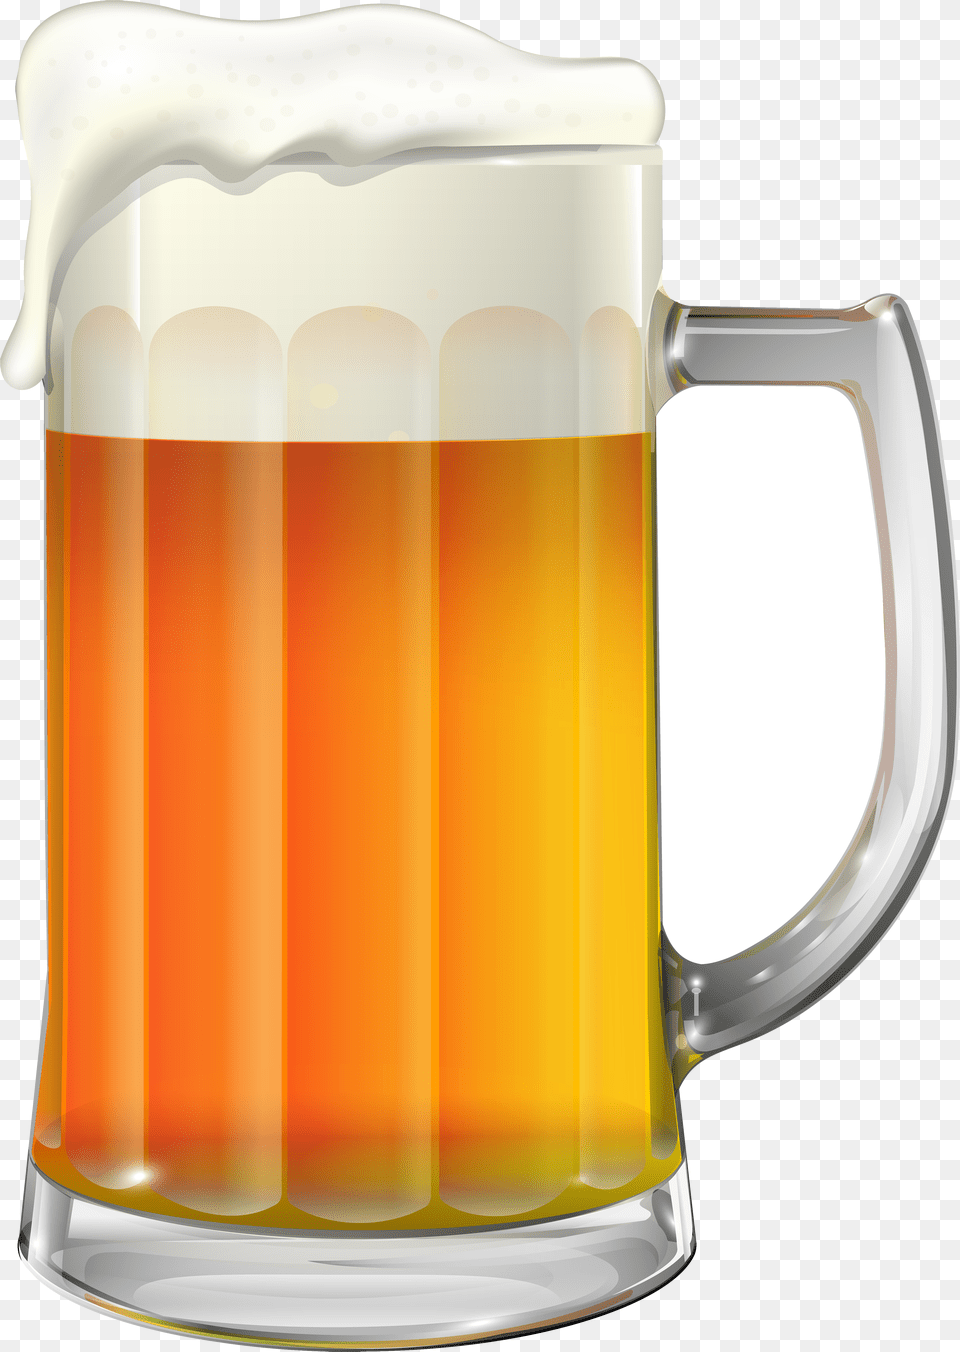 Beer Mug Transparent Clip Art Image Gallery Transparent Background Beer Mug Clip Art, Alcohol, Beverage, Cup, Glass Free Png Download